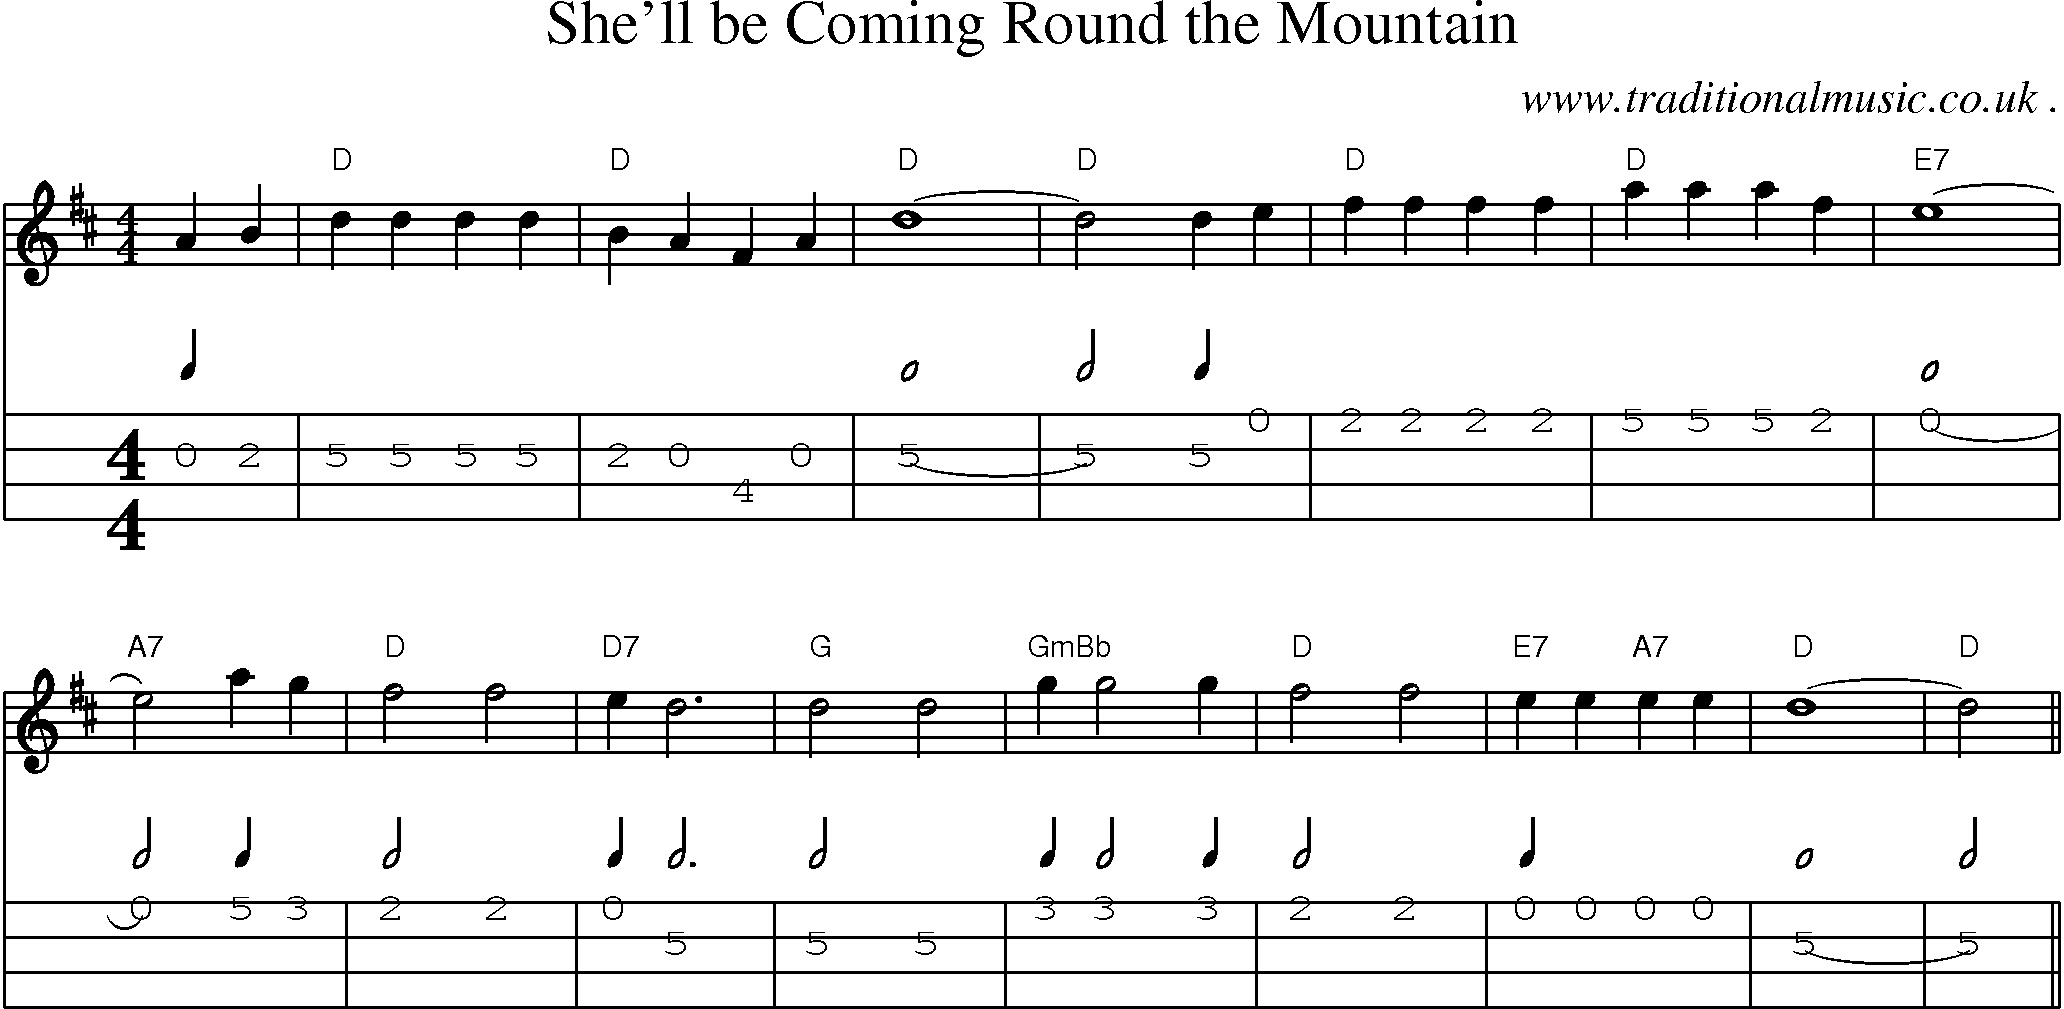 Sheet-Music and Mandolin Tabs for Shell Be Coming Round The Mountain